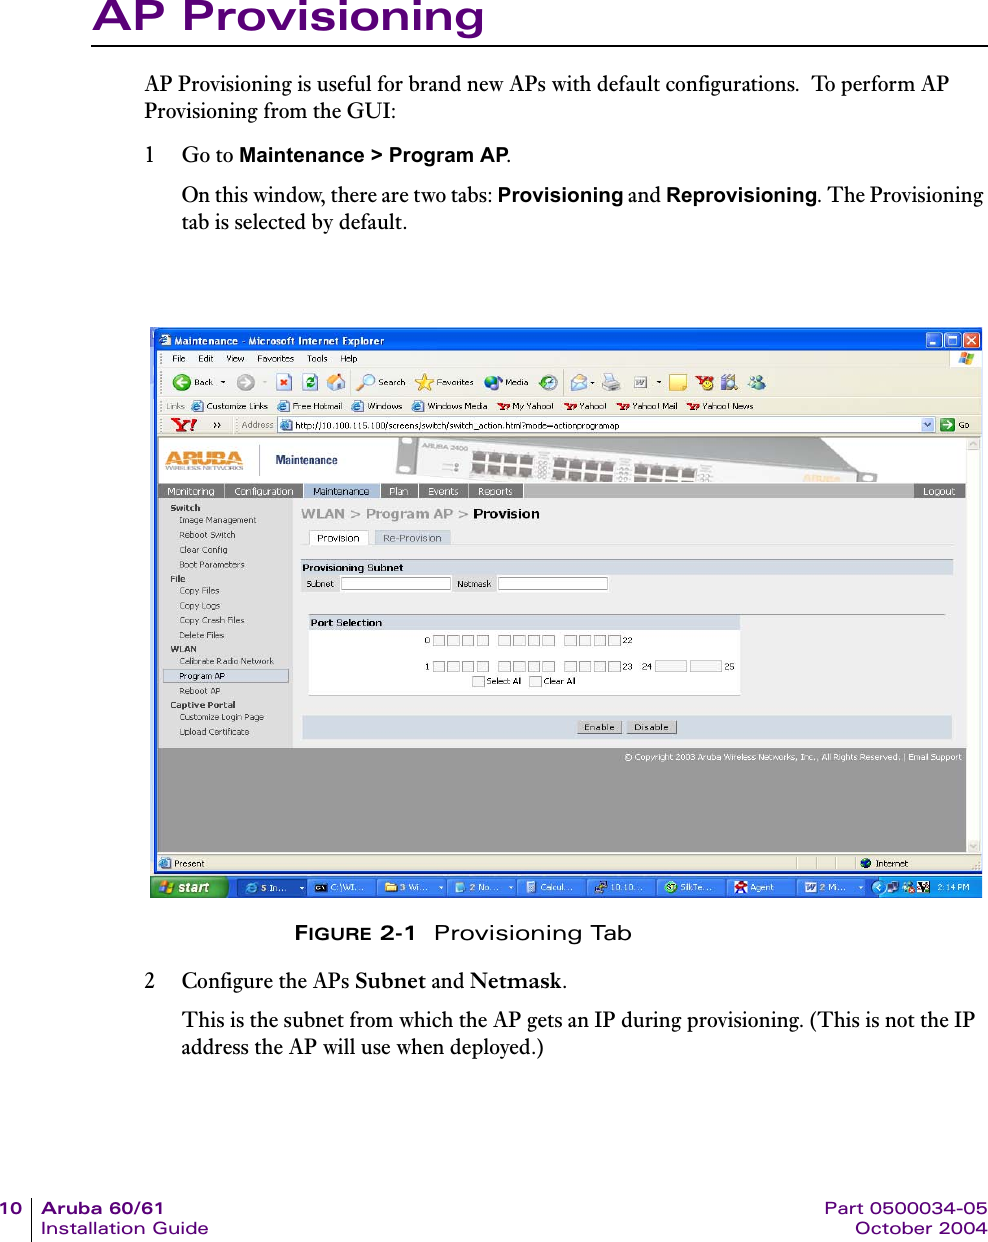 10 Aruba 60/61 Part 0500034-05Installation Guide October 2004AP ProvisioningAP Provisioning is useful for brand new APs with default configurations.  To perform AP Provisioning from the GUI:1Go to Maintenance &gt; Program AP.On this window, there are two tabs: Provisioning and Reprovisioning. The Provisioning tab is selected by default.FIGURE 2-1  Provisioning Tab2 Configure the APs Subnet and Netmask. This is the subnet from which the AP gets an IP during provisioning. (This is not the IP address the AP will use when deployed.)